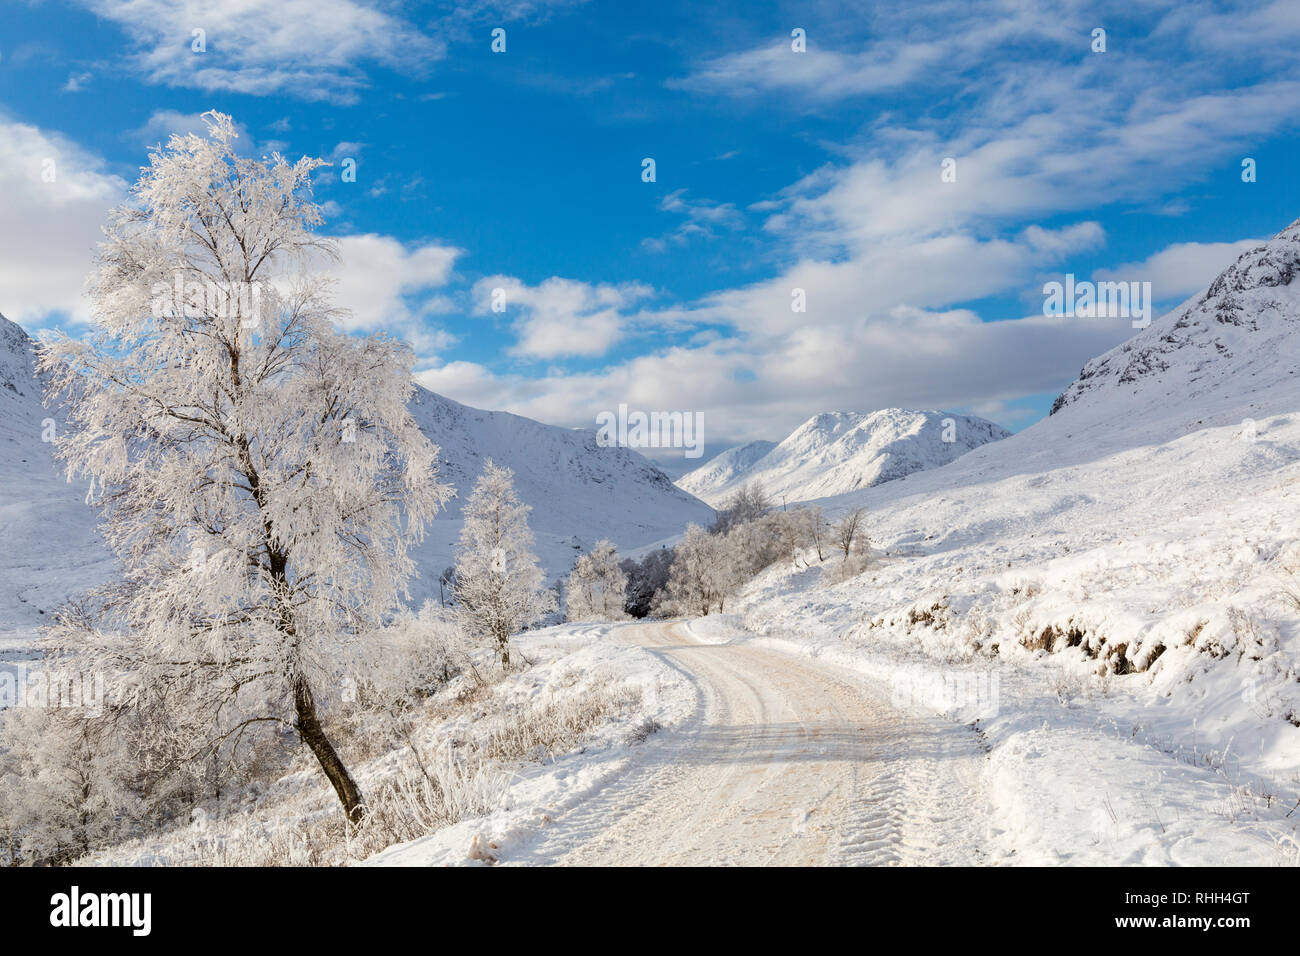 hoar frost turns the scene into a winter wonderland along the long road by Coupall Falls to Glen Etive at Rannoch Moor, Highlands, Scotland in Winter Stock Photo